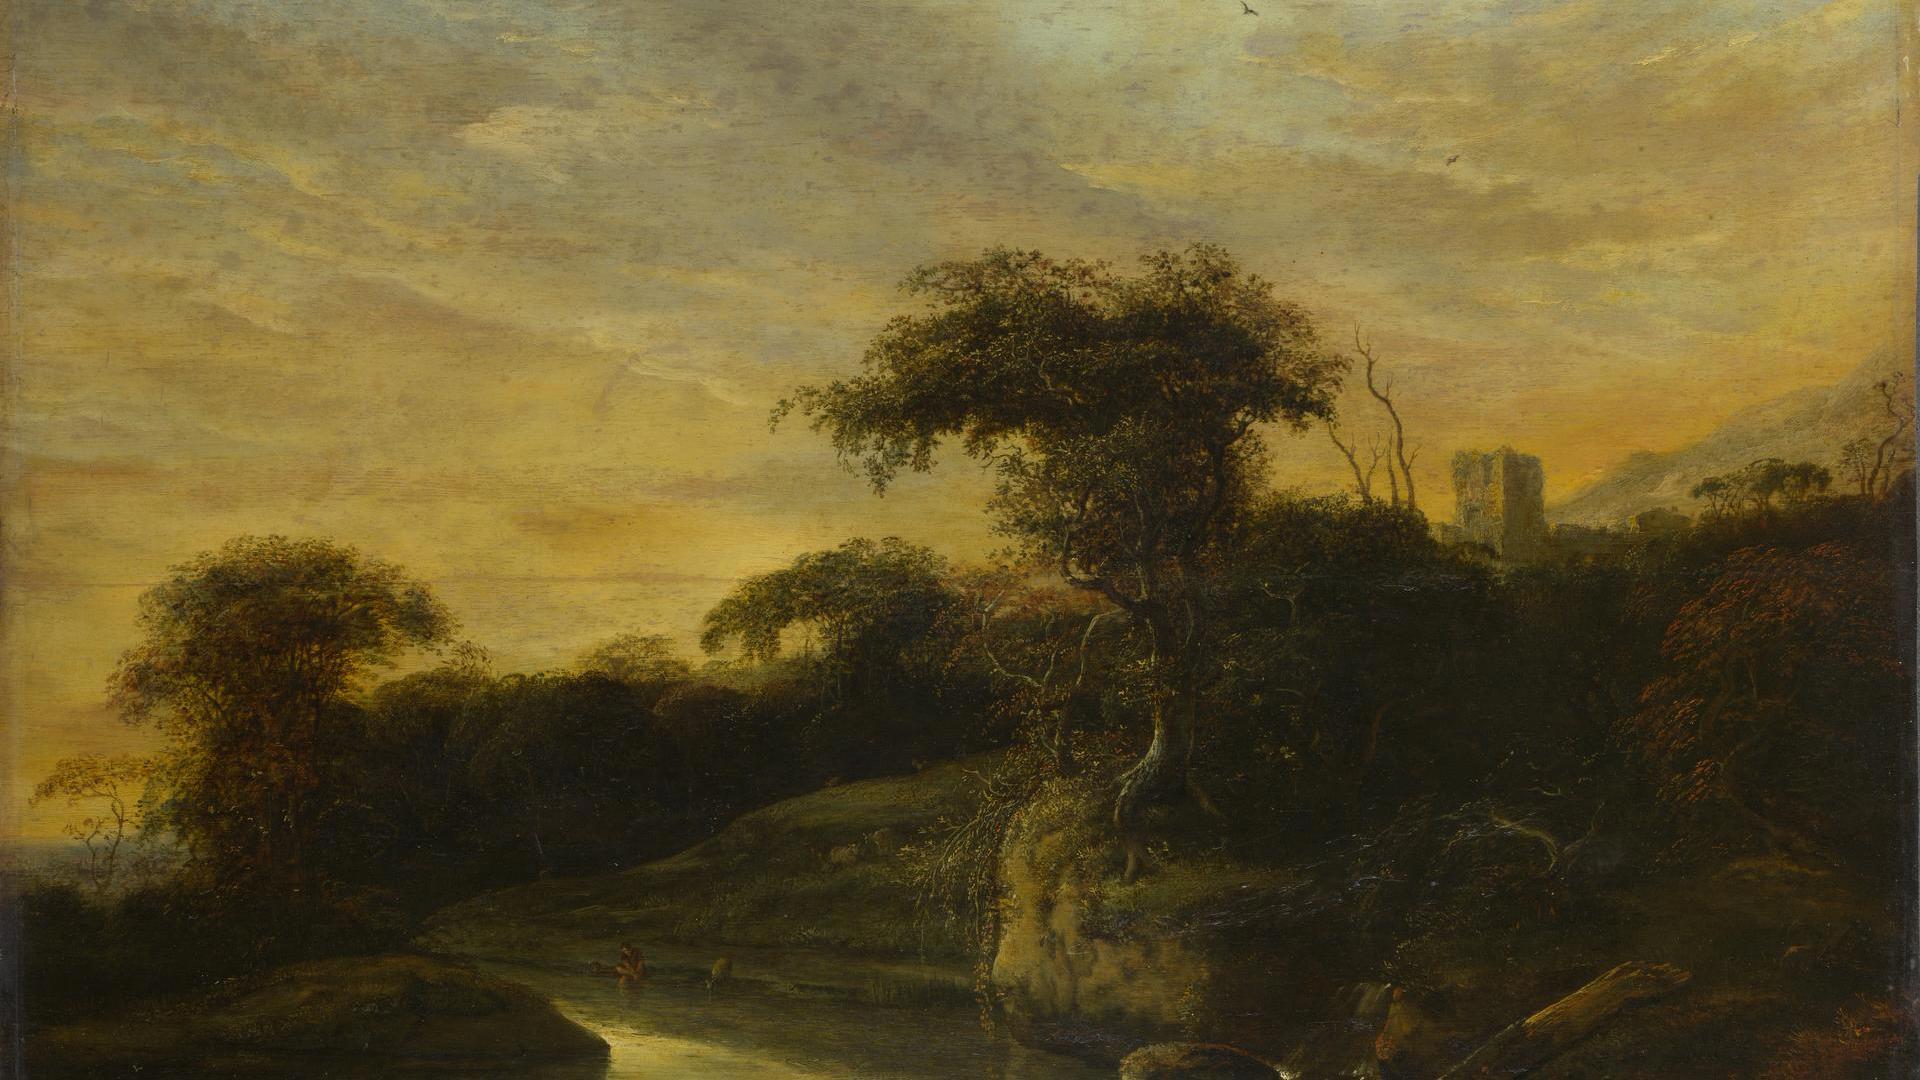 A Landscape with a River at the Foot of a Hill by Jacob de Wet the Elder